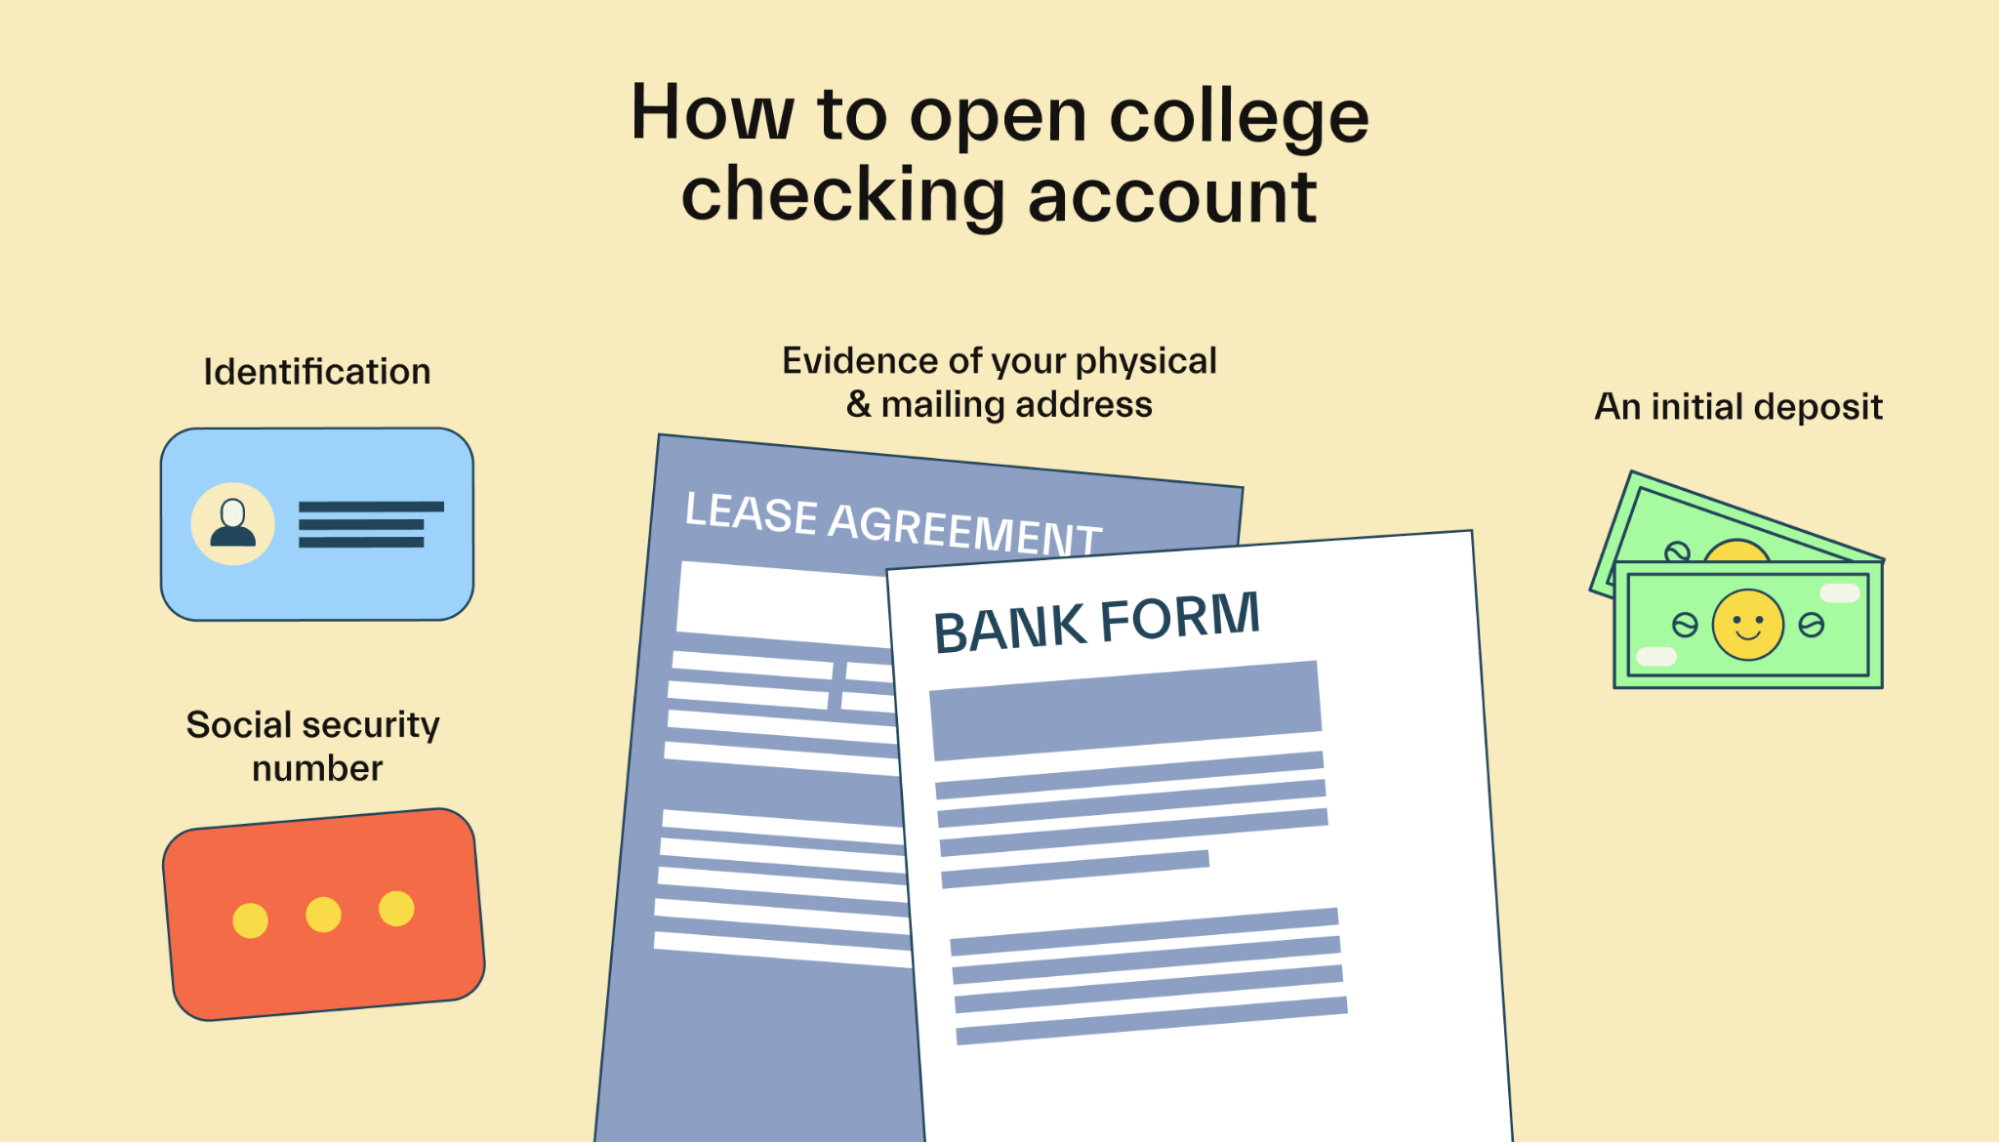 How to open college checking account